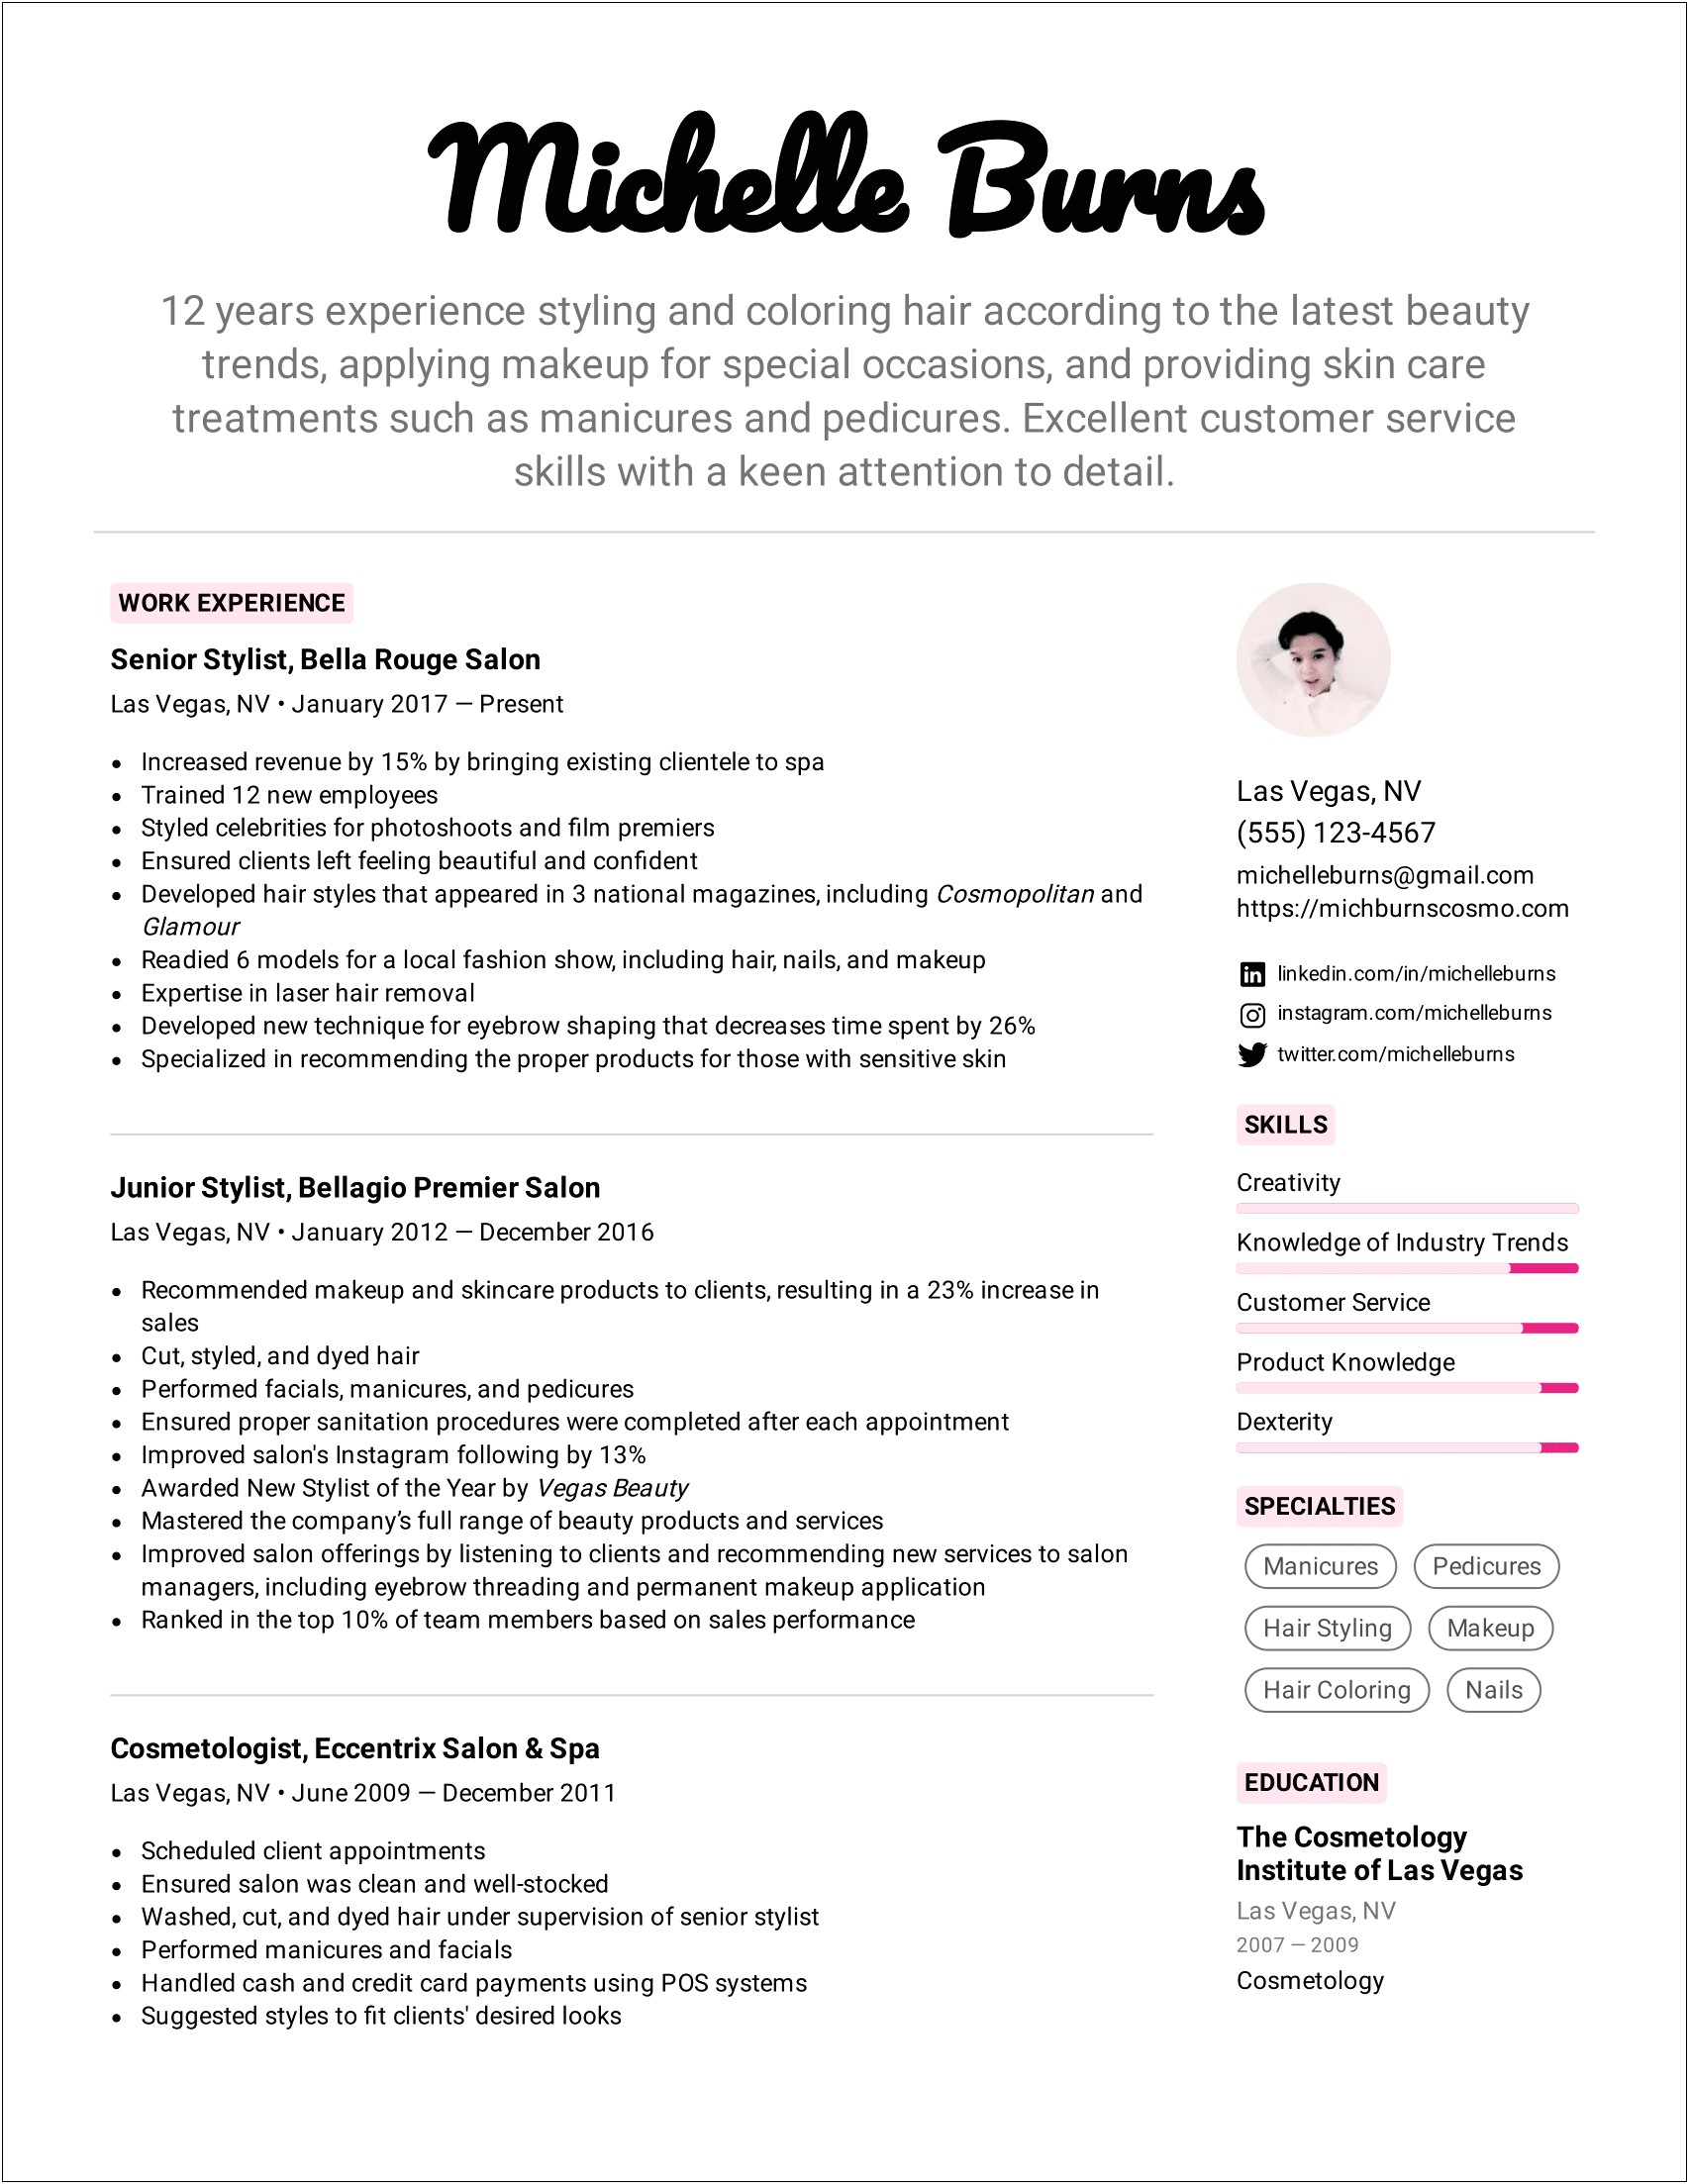 Skin Care Specialist Resume Objective